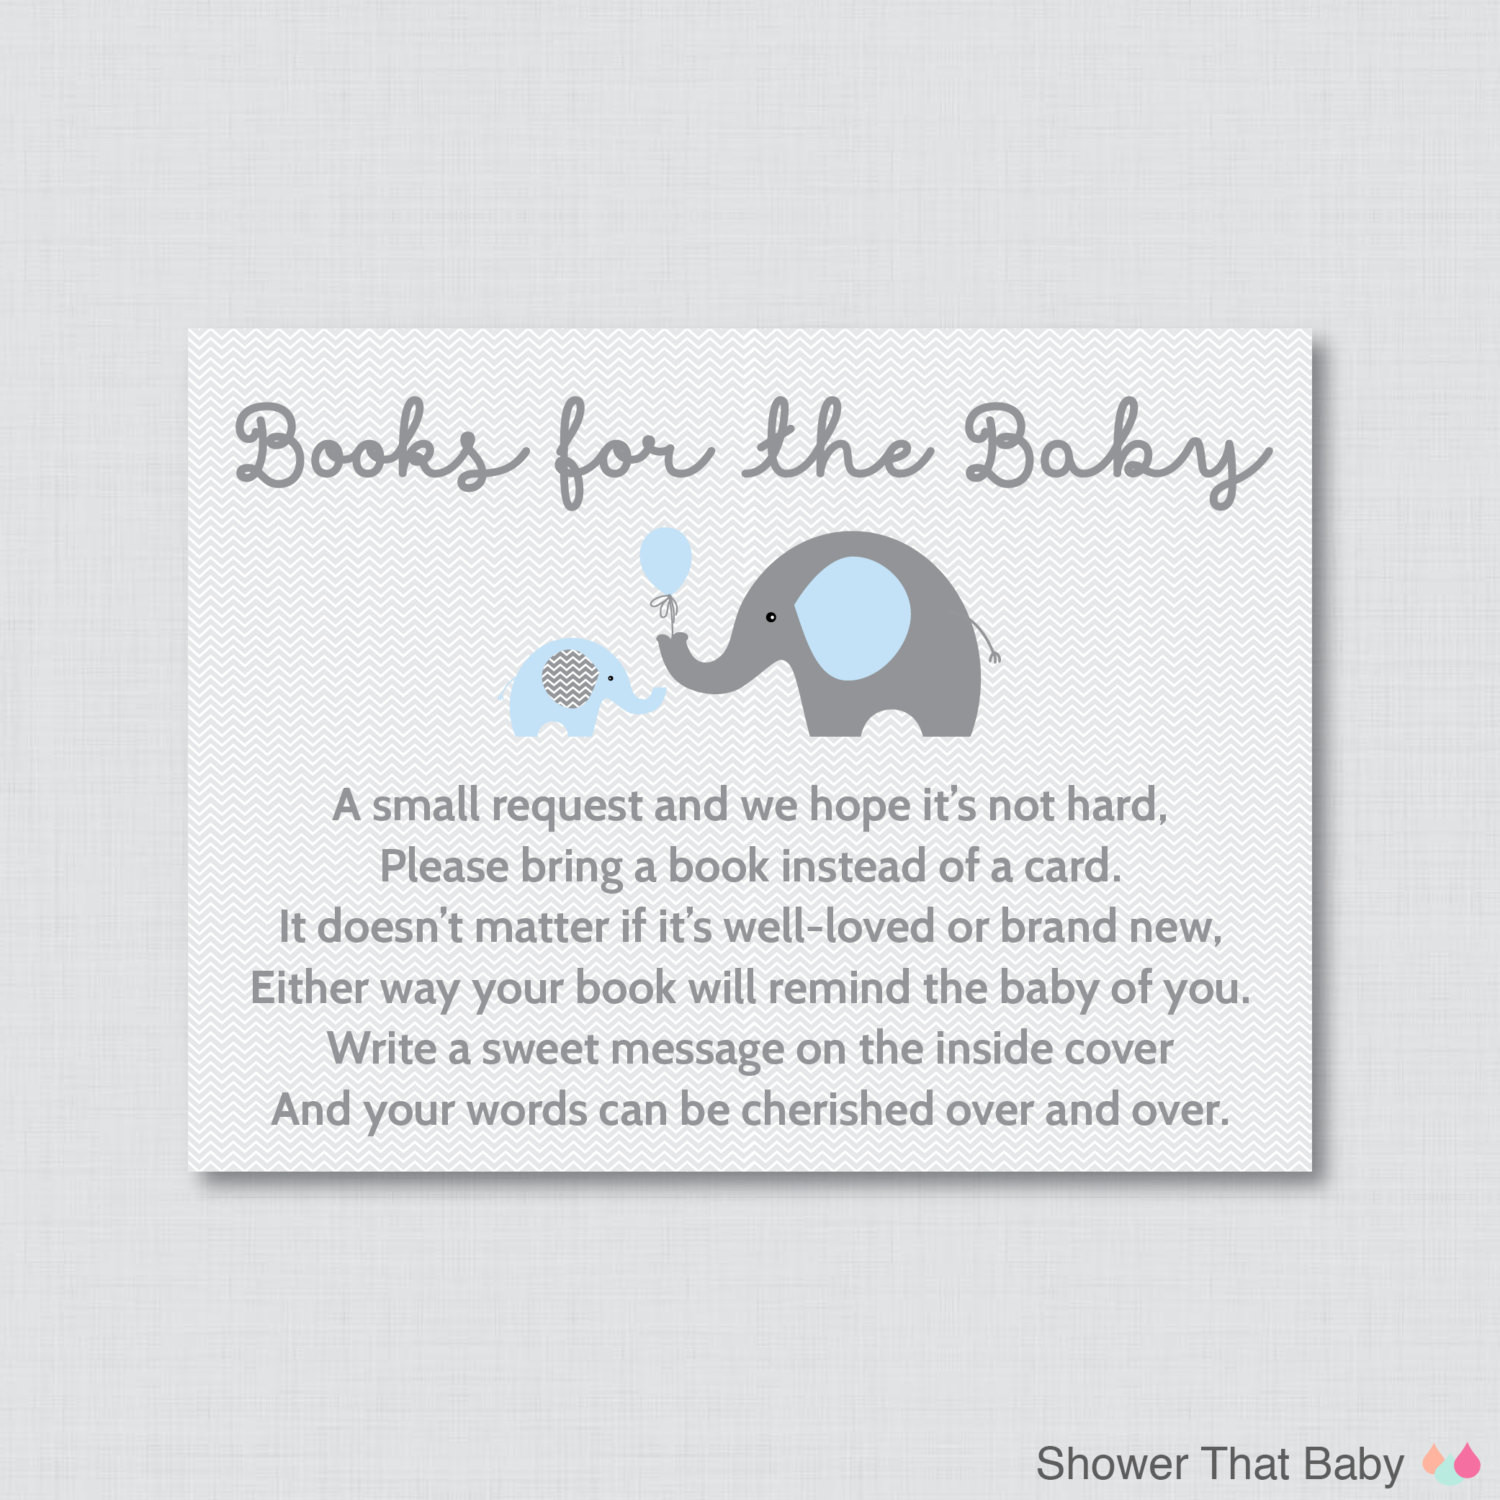 Quote For Baby Shower Book
 Elephant Baby Shower Bring a Book Instead of a Card Invitation